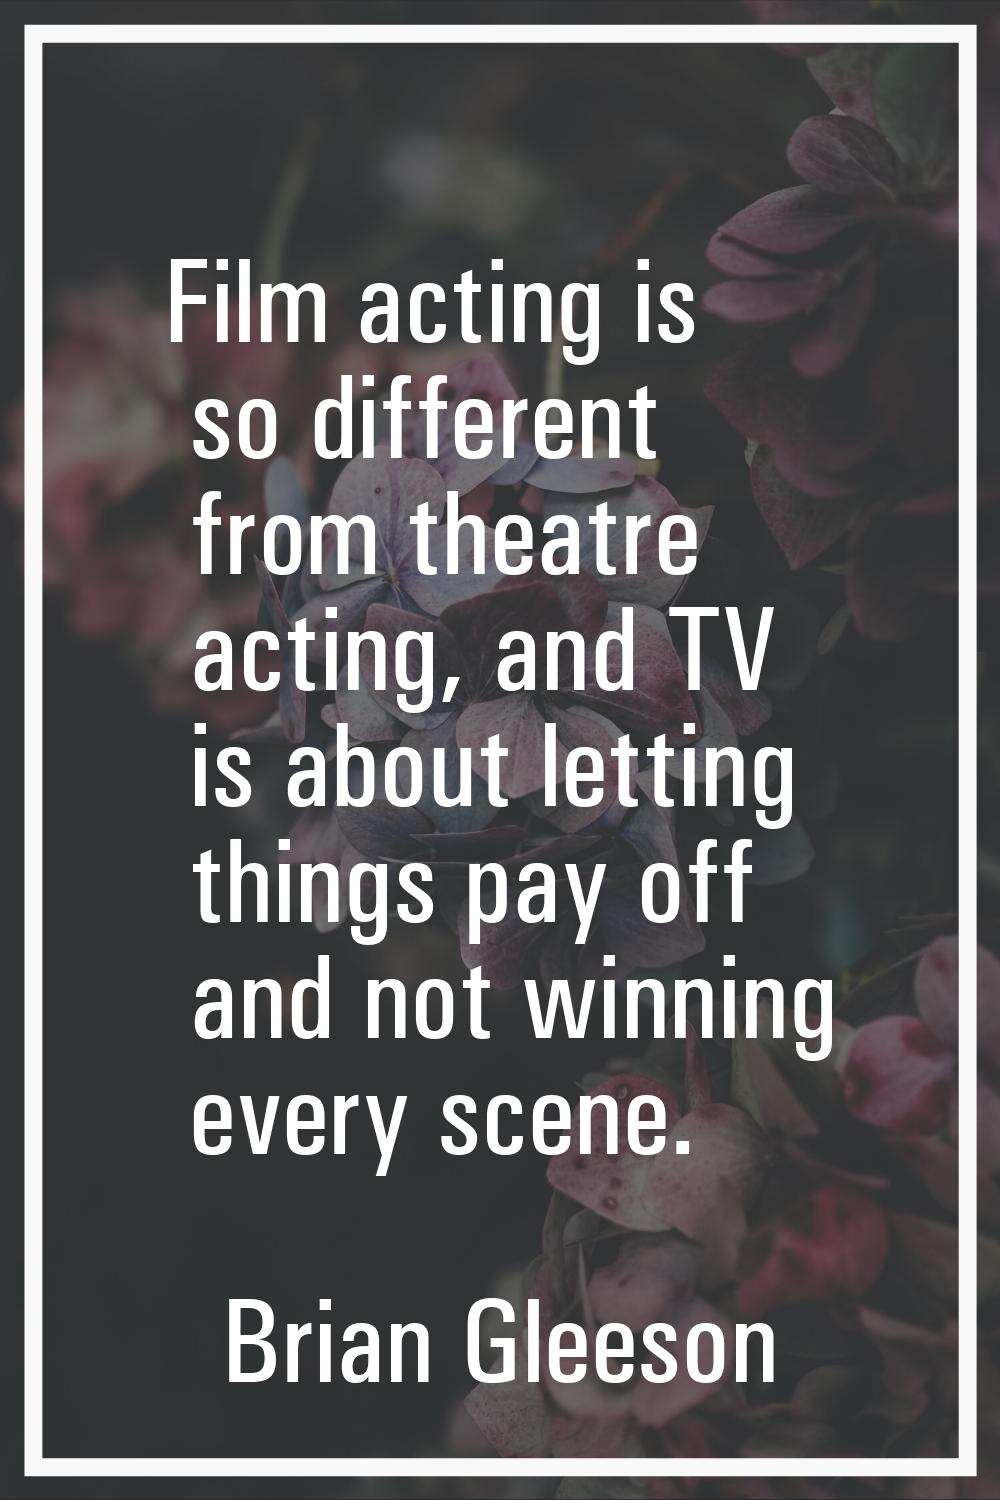 Film acting is so different from theatre acting, and TV is about letting things pay off and not win